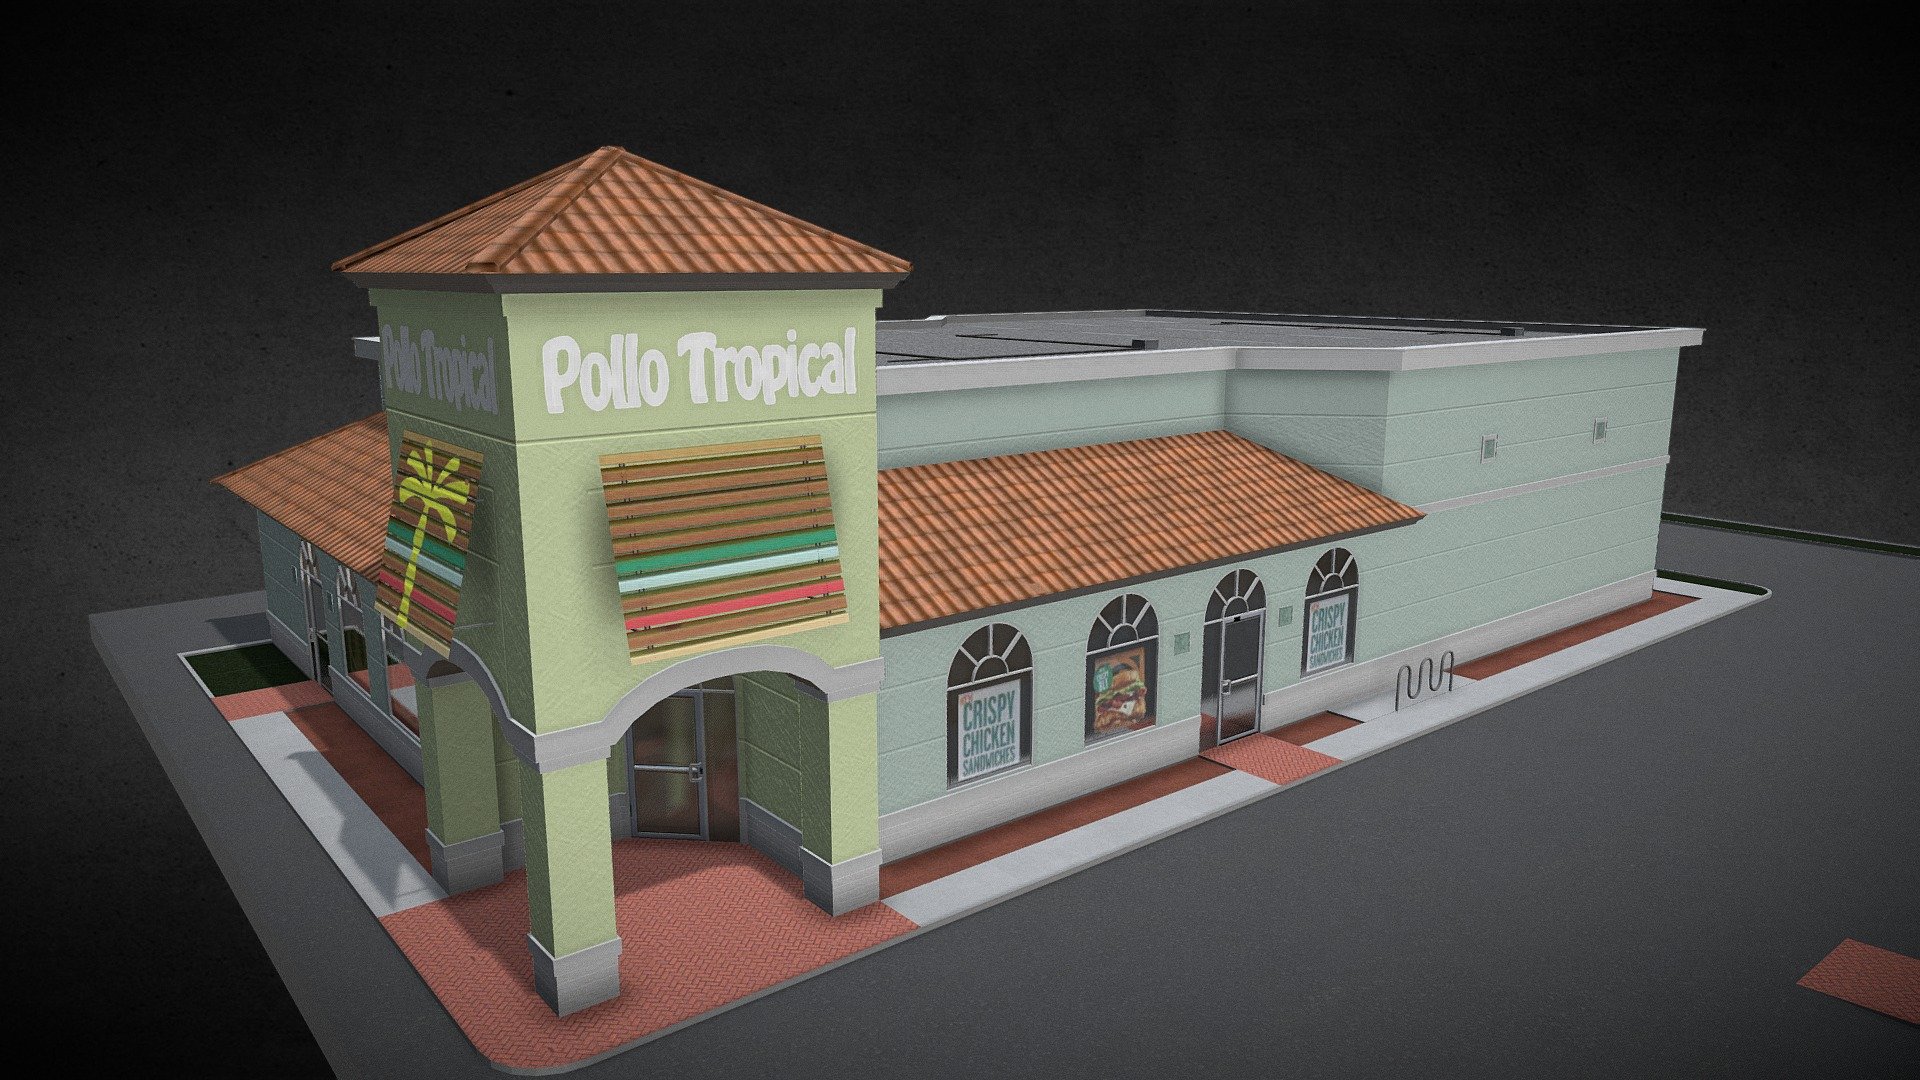 Pollo Tropical is a fast food restaurant chain based in Miami, Florida.
Specializing in grilled chicken and Caribbean cuisine, it is owned by the Carrols group.

Created and adapted to be integrated in the game &ldquo;CitiesSkylines